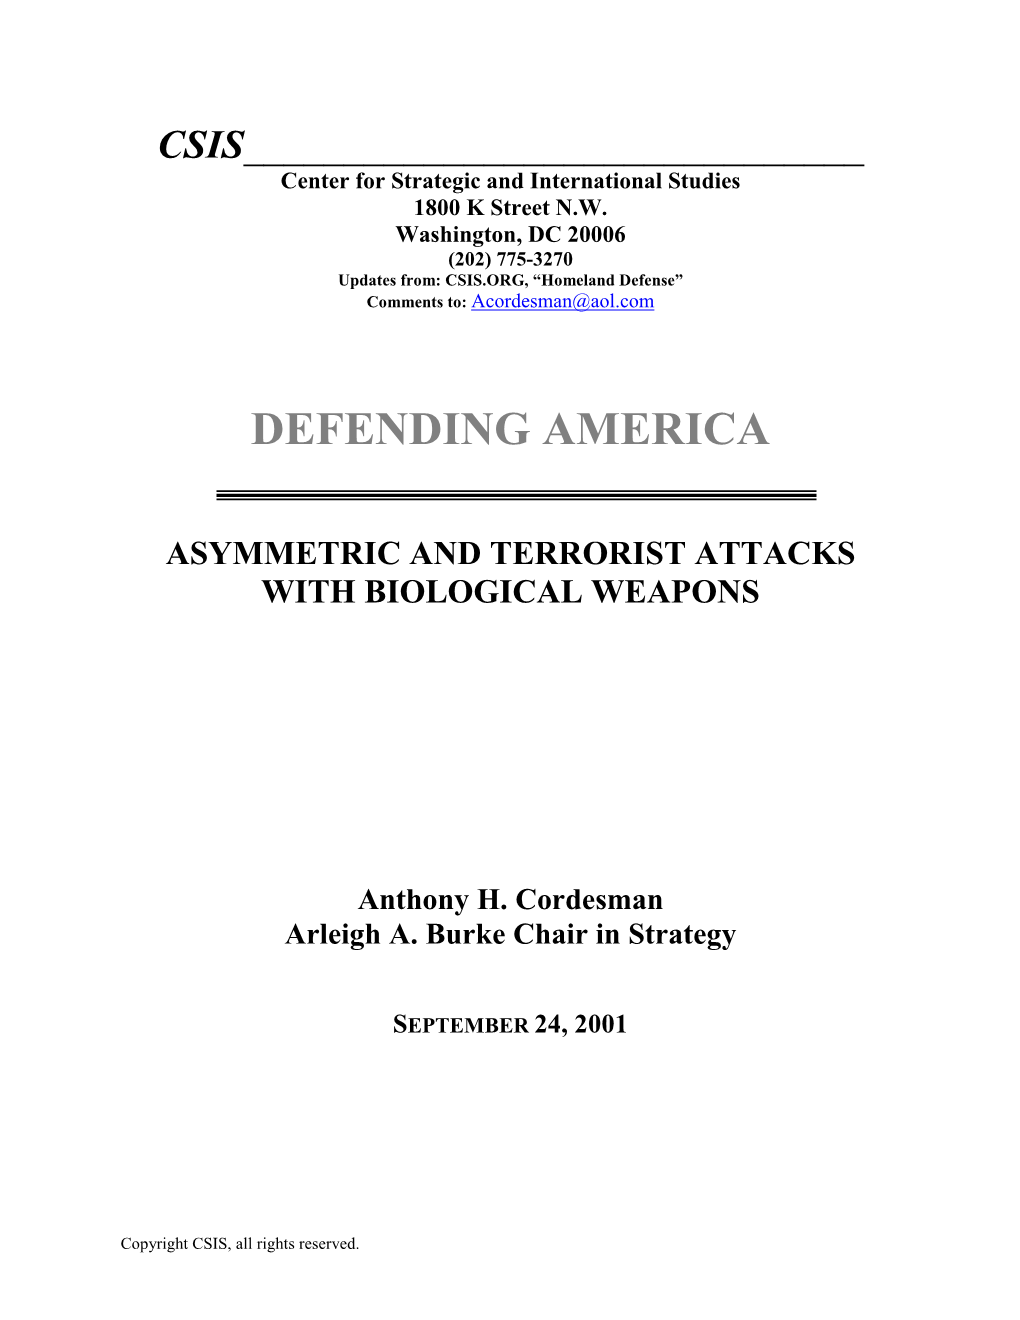 Asymmetric and Terrorist Attacks with Biological Weapons